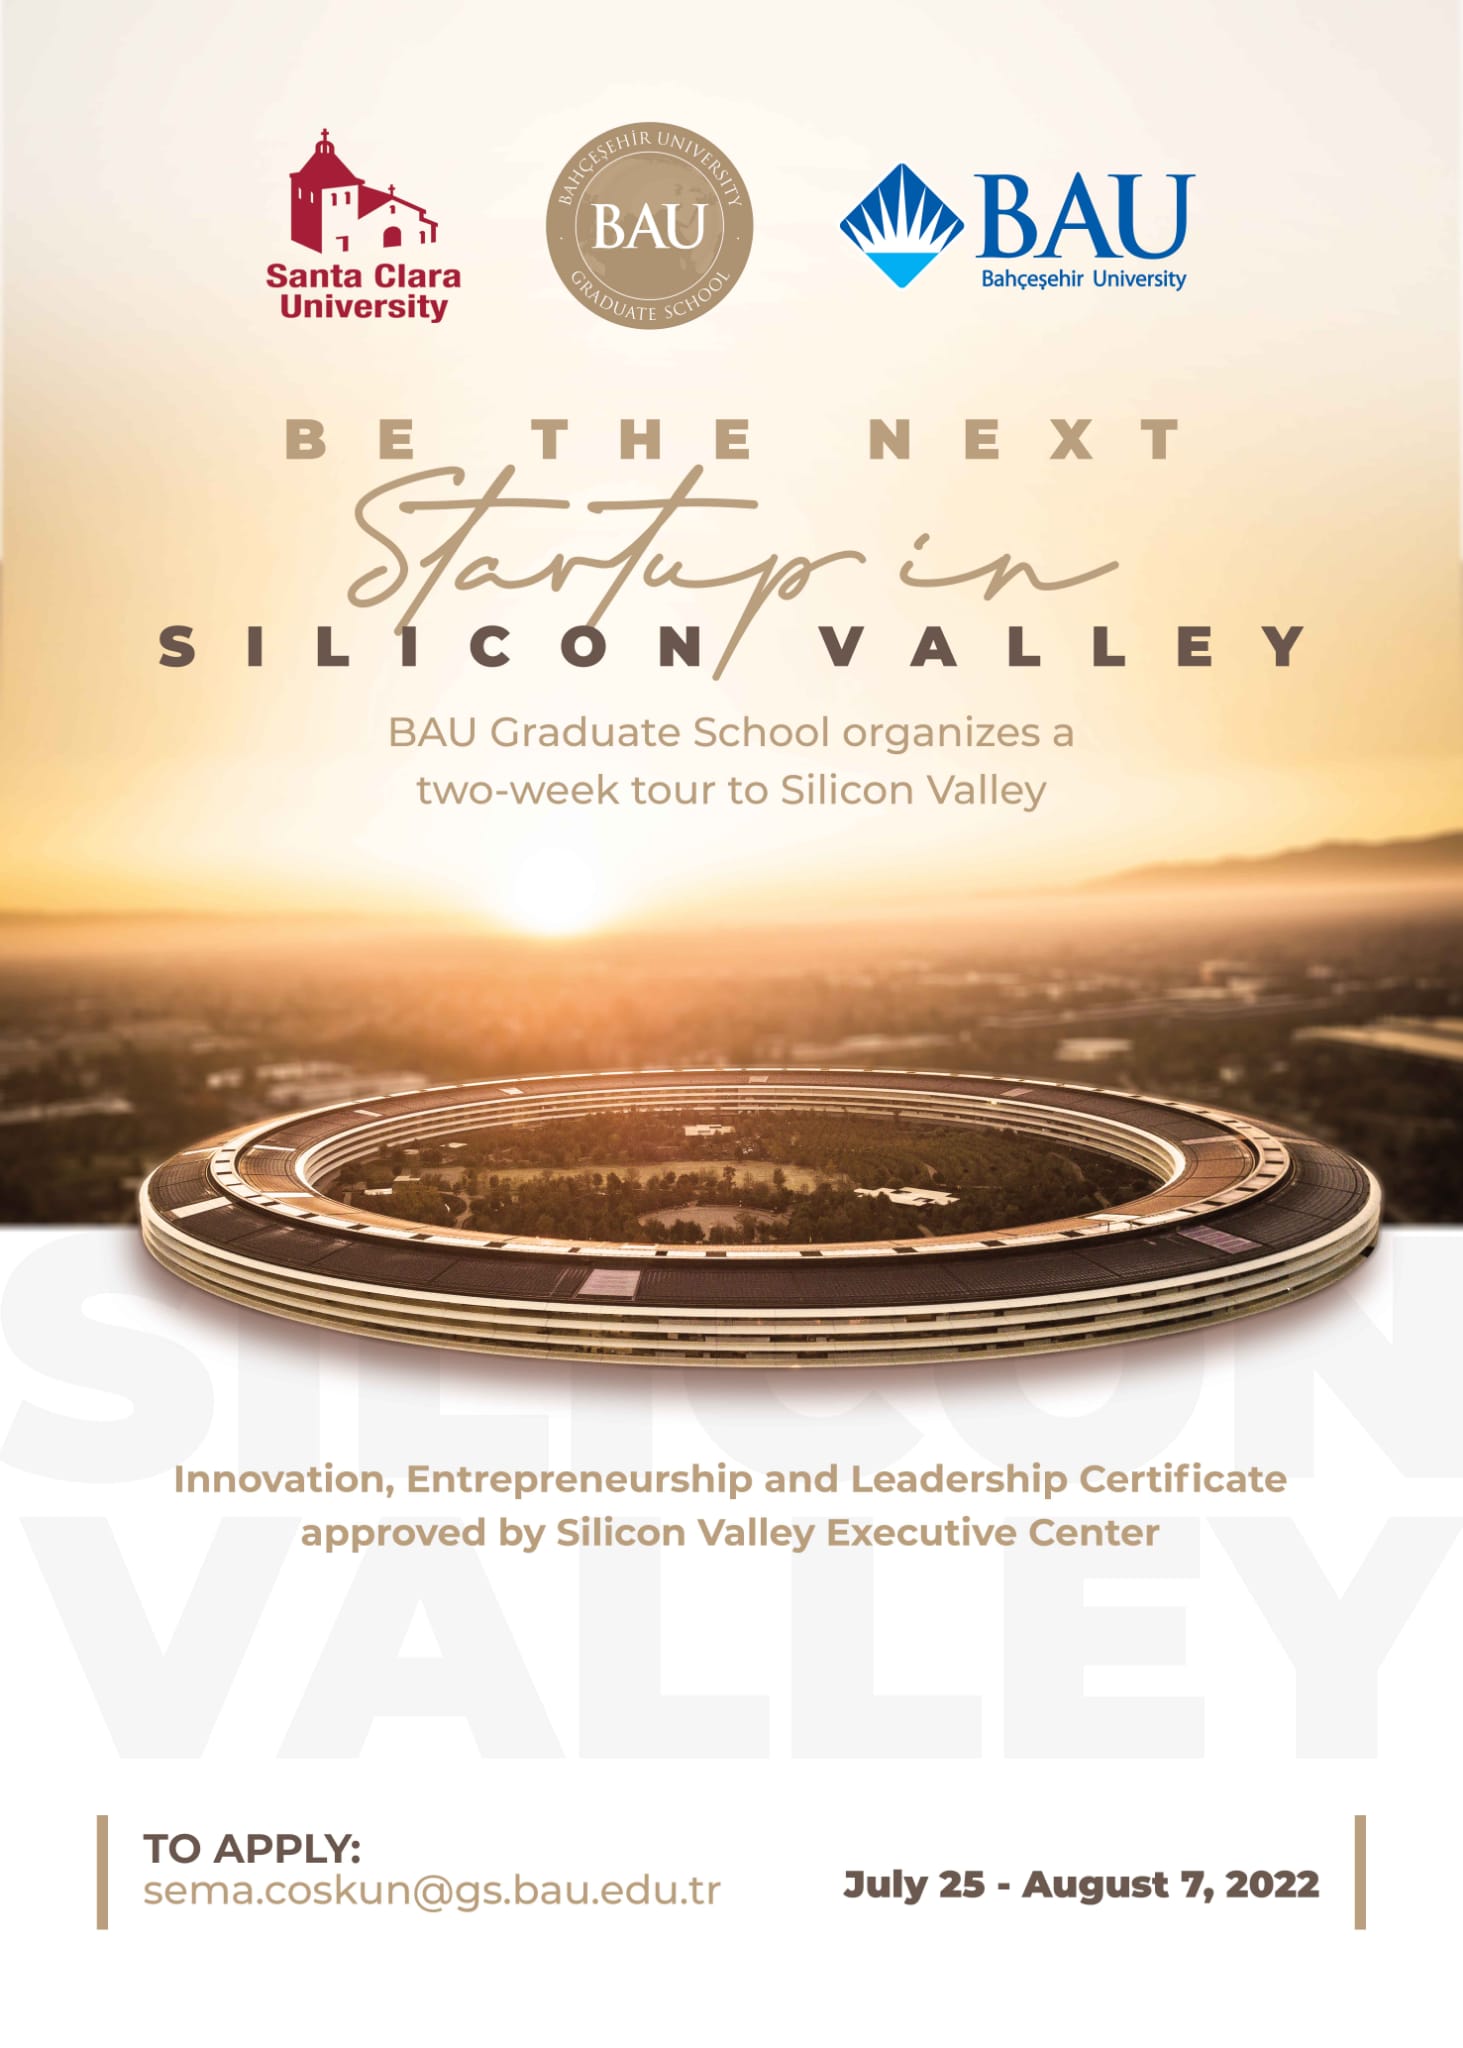 Be the Next Startup in Silicon Valley!